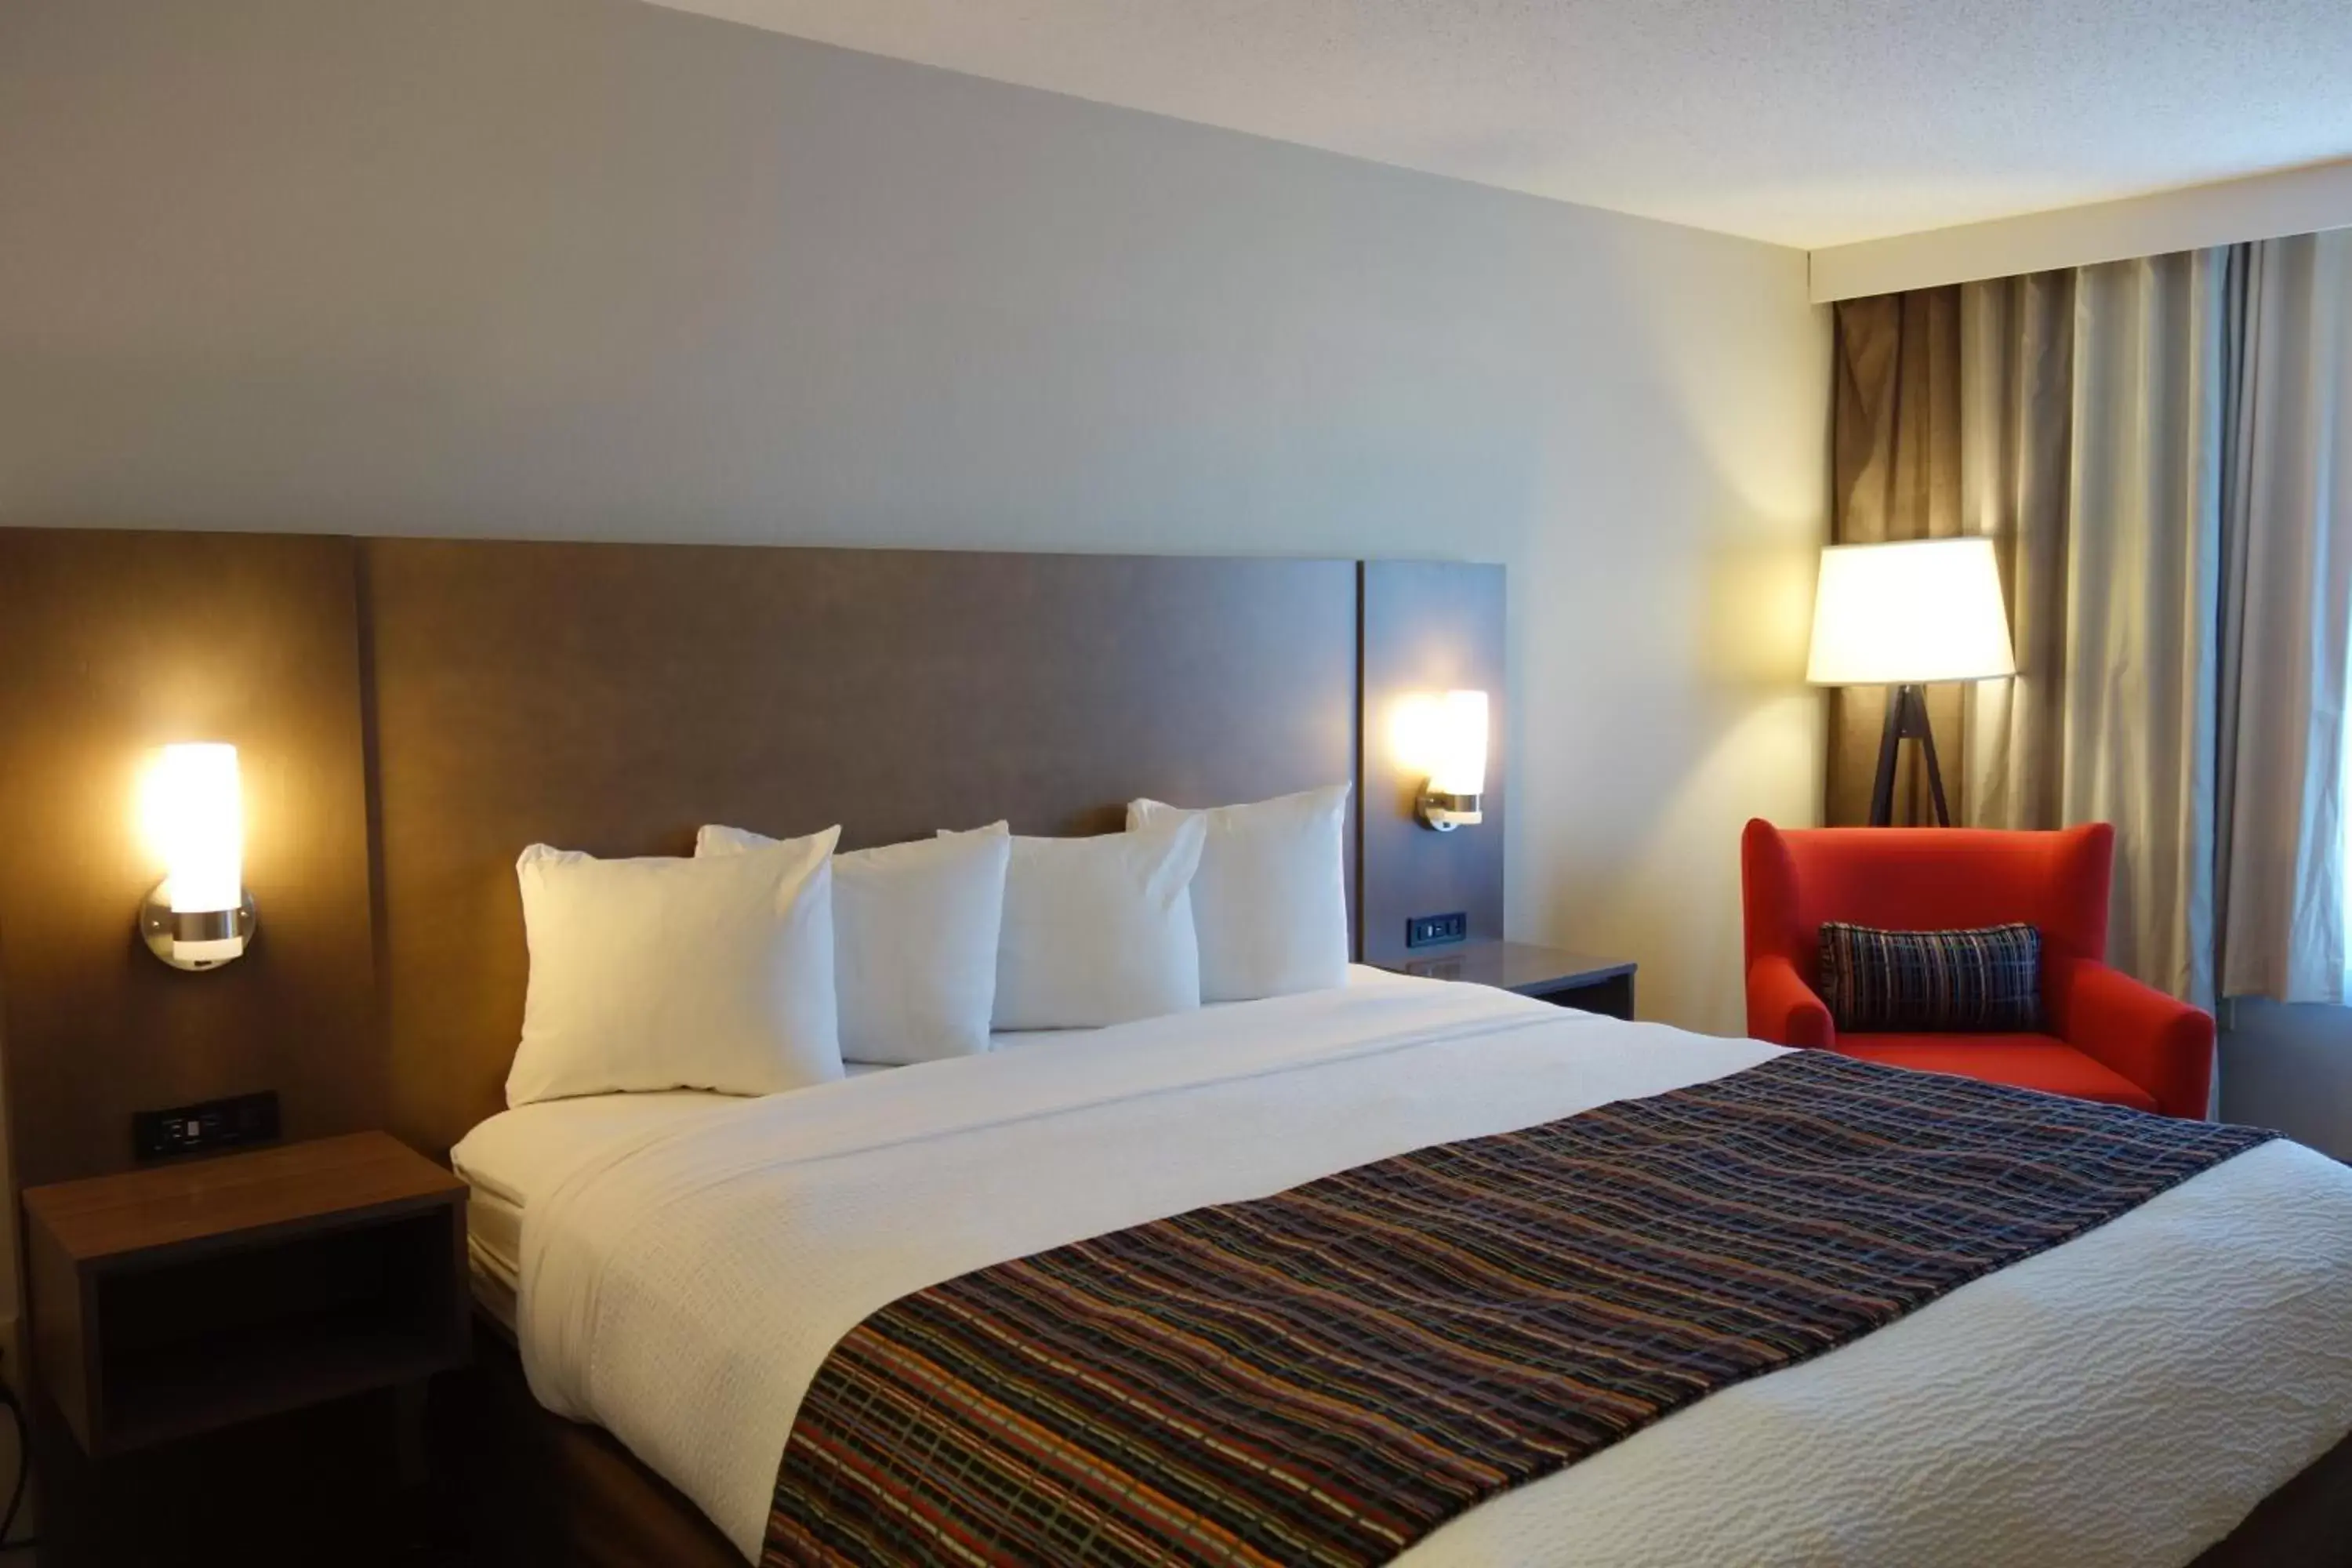 Bed in Country Inn & Suites by Radisson, Mason City, IA